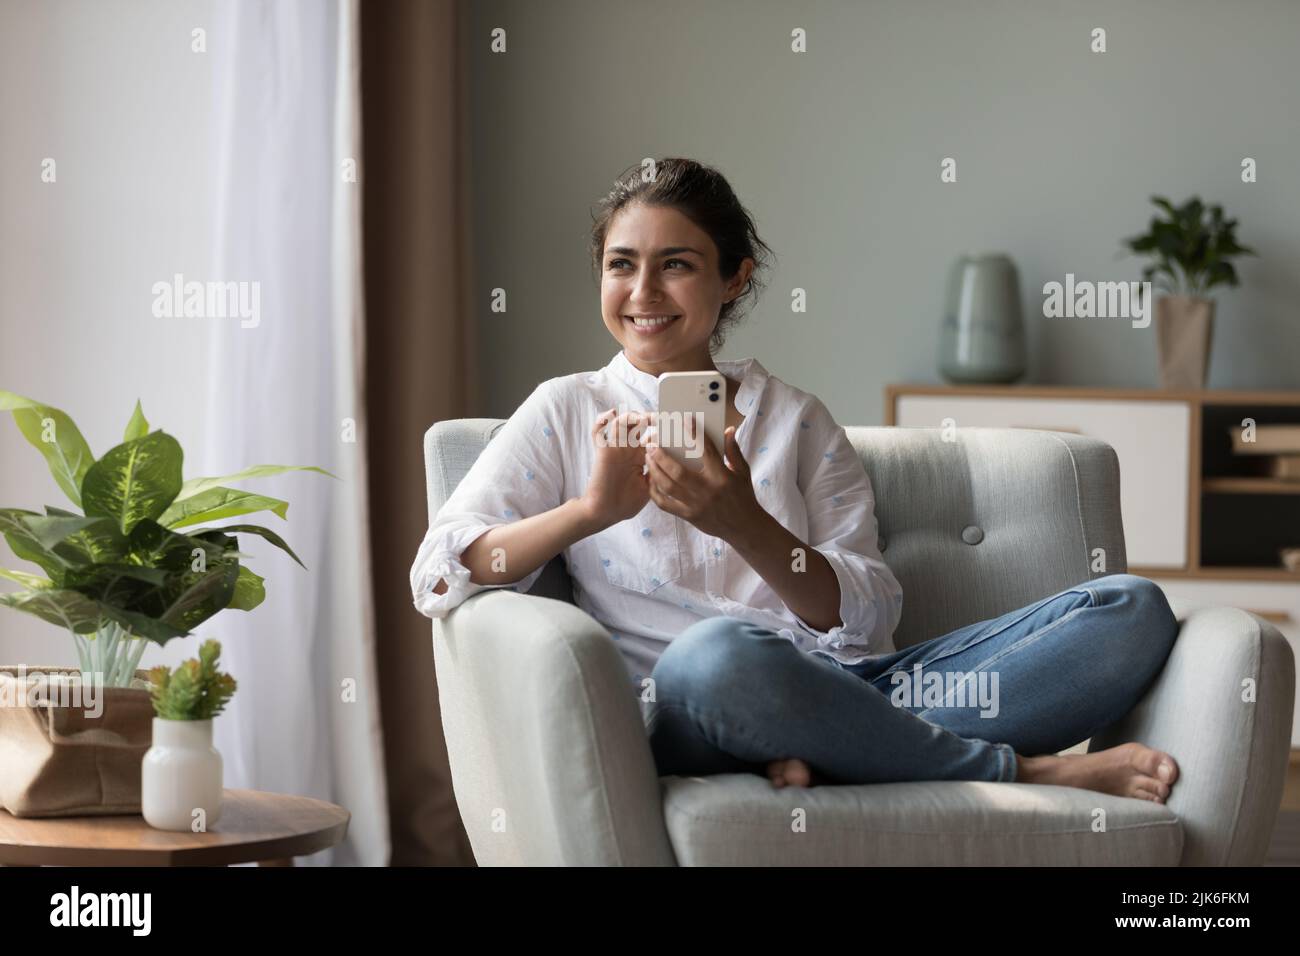 Cheerful beautiful young Indian woman holding cell, sitting in armchair Stock Photo